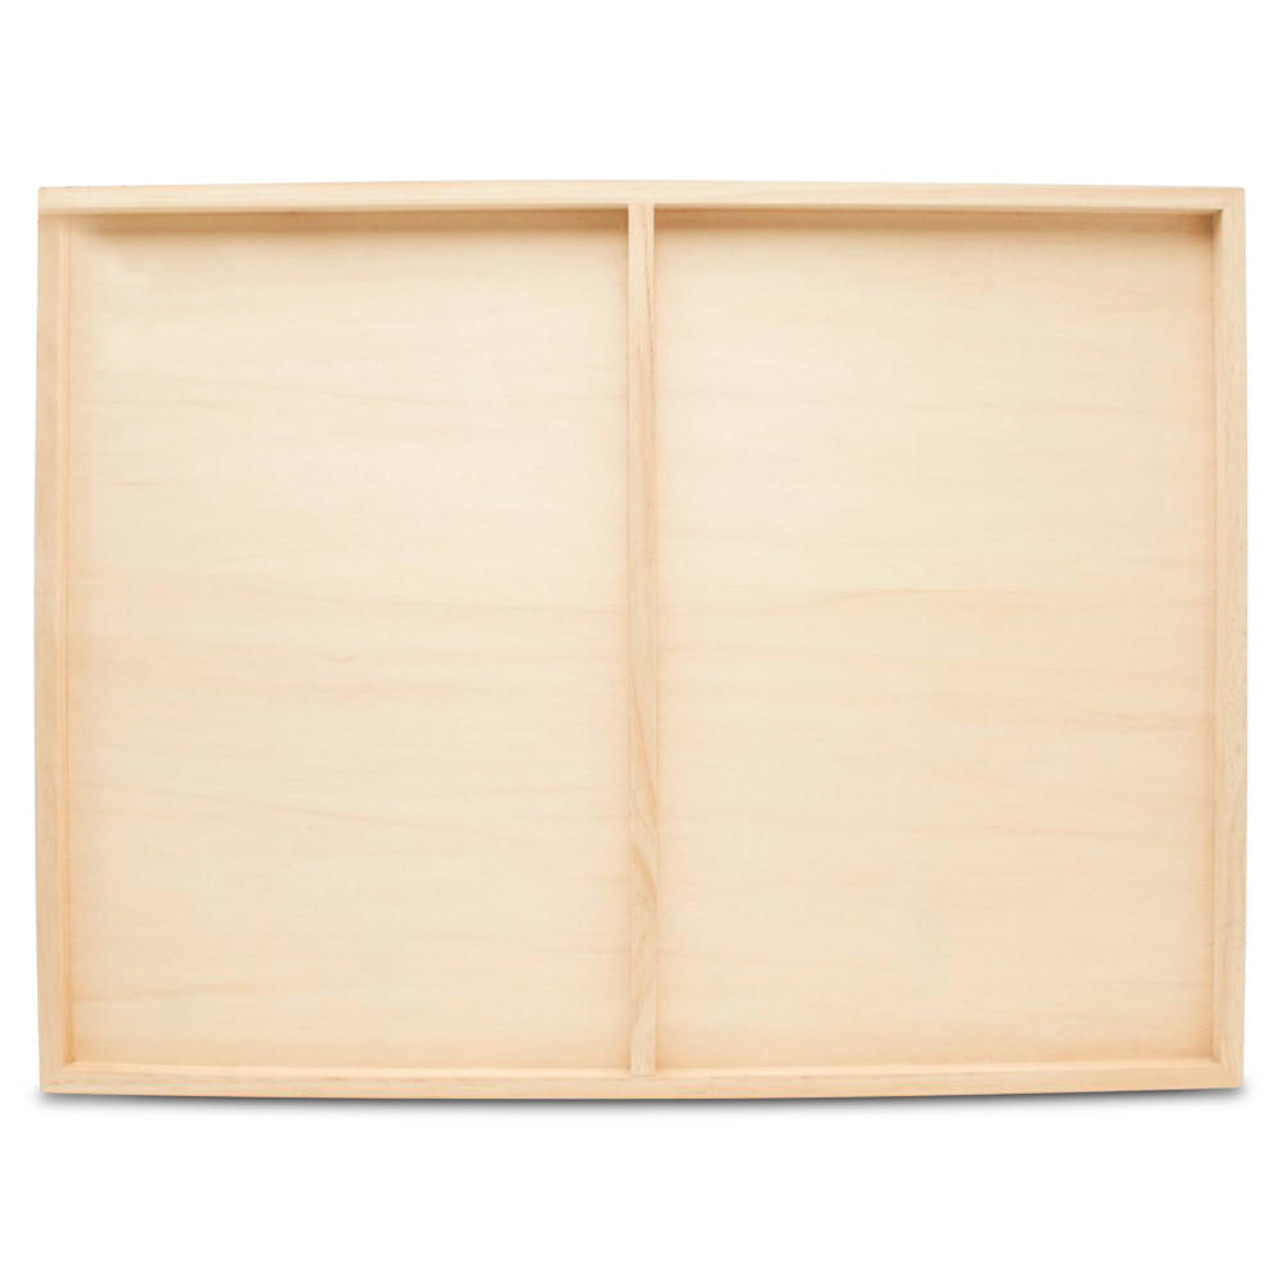 Pintura Painting Canvas 18x24 Wood Panels, Pack of 2